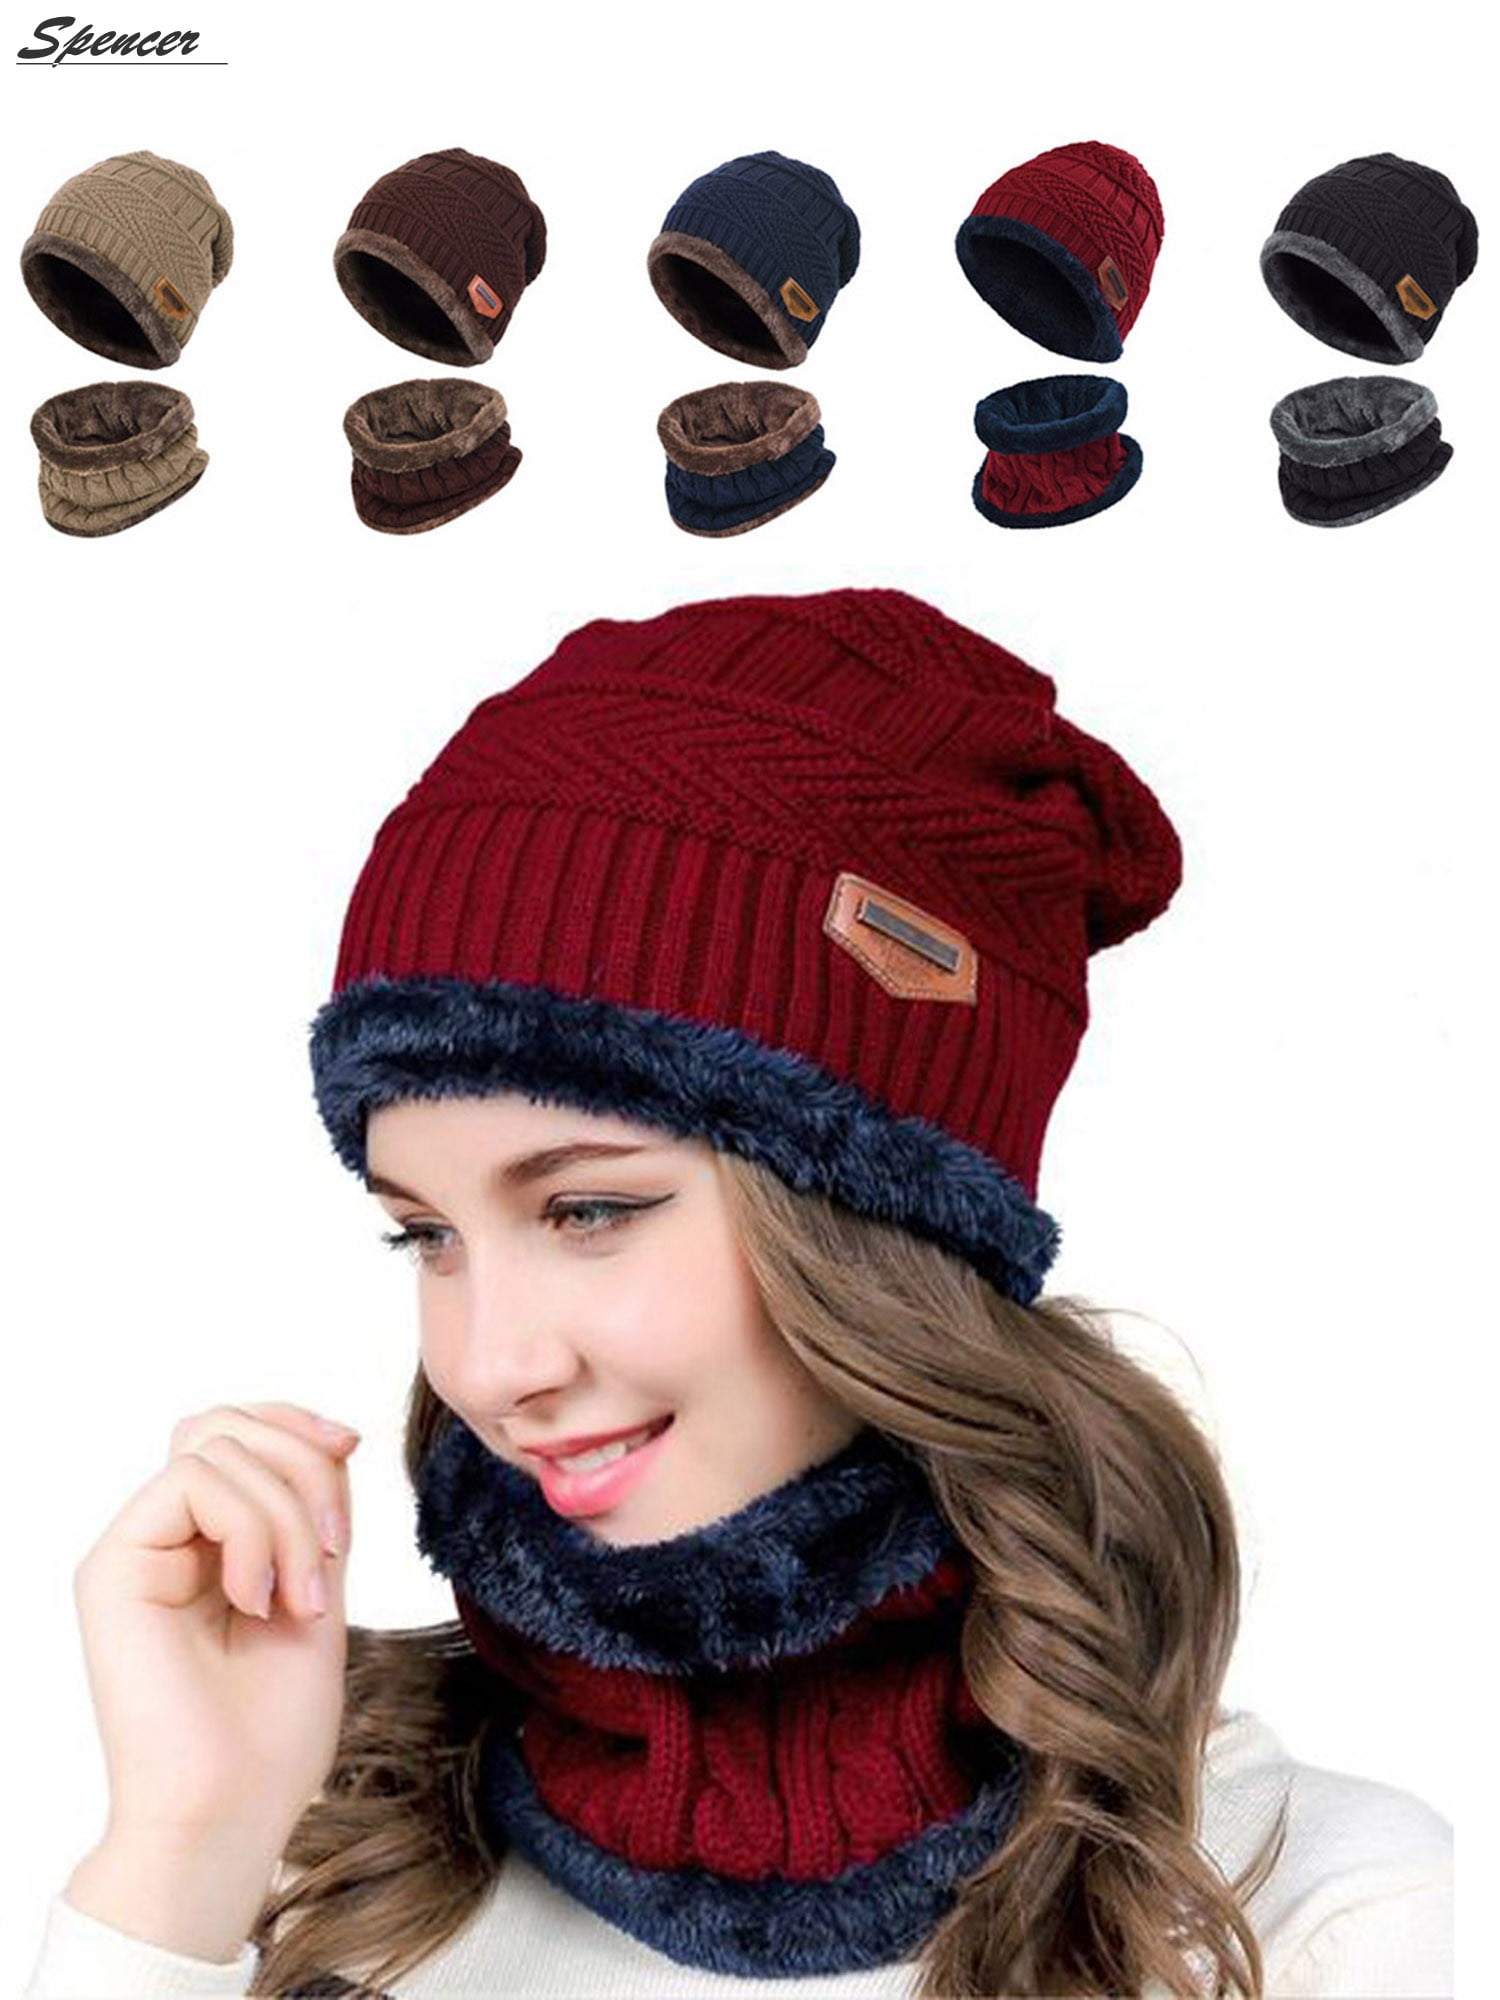 Spencer 2Pcs Winter Beanie Hat Scarf Set Lined Warm Knitted Hat Thick Skull  Cap for Men Women Brown